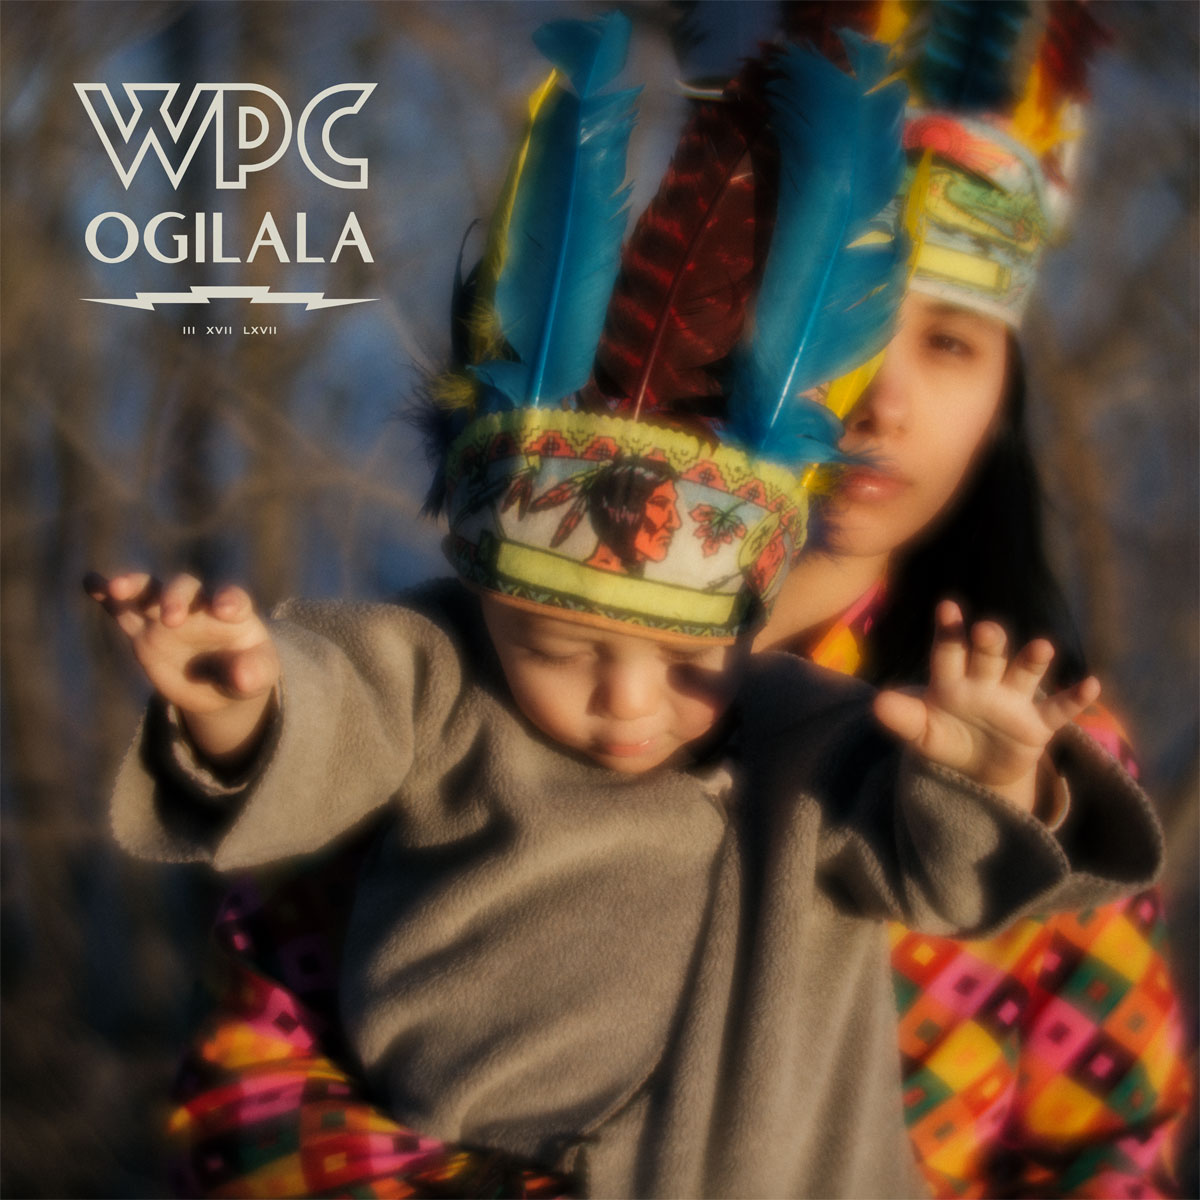 Billy Corgan Announces Solo Album <i>Ogilala</i>, Releases Single “Aeronaut”” title=”VINYL_GATEFOLD-1503413197″ data-original-id=”254675″ data-adjusted-id=”254675″ class=”sm_size_full_width sm_alignment_center ” data-image-source=”getty” />
<p>10/14 Brooklyn, NY – Murmrr Theatre<br />
10/15 Brooklyn, NY – Murmrr Theatre<br />
10/18 Wilmington, DE – Grand Opera House<br />
10/20 Toronto, Ontario – Queen Elizabeth Theatre<br />
10/24 Chicago, IL – Athenaeum Theatre<br />
10/25 Chicago, IL – Athenaeum Theatre<br />
10/27 Nashville, TN – CMA Theater<br />
10/29 Boulder, CO – Boulder Theater<br />
11/1 San Francisco, CA – Herbst Theatre<br />
11/2 San Francisco, CA – Herbst Theatre<br />
11/9 Los Angeles, CA – The Masonic Lodge at Hollywood Forever Cemetery<br />
11/10 Los Angeles, CA – The Masonic Lodge at Hollywood Forever Cemetery<br />
11/11 Los Angeles, CA – The Masonic Lodge at Hollywood Forever Cemetery</p>
</p>		</div>
				</div>
						</div>
					</div>
		</div>
								</div>
					</div>
		</section>
				<section data-particle_enable=